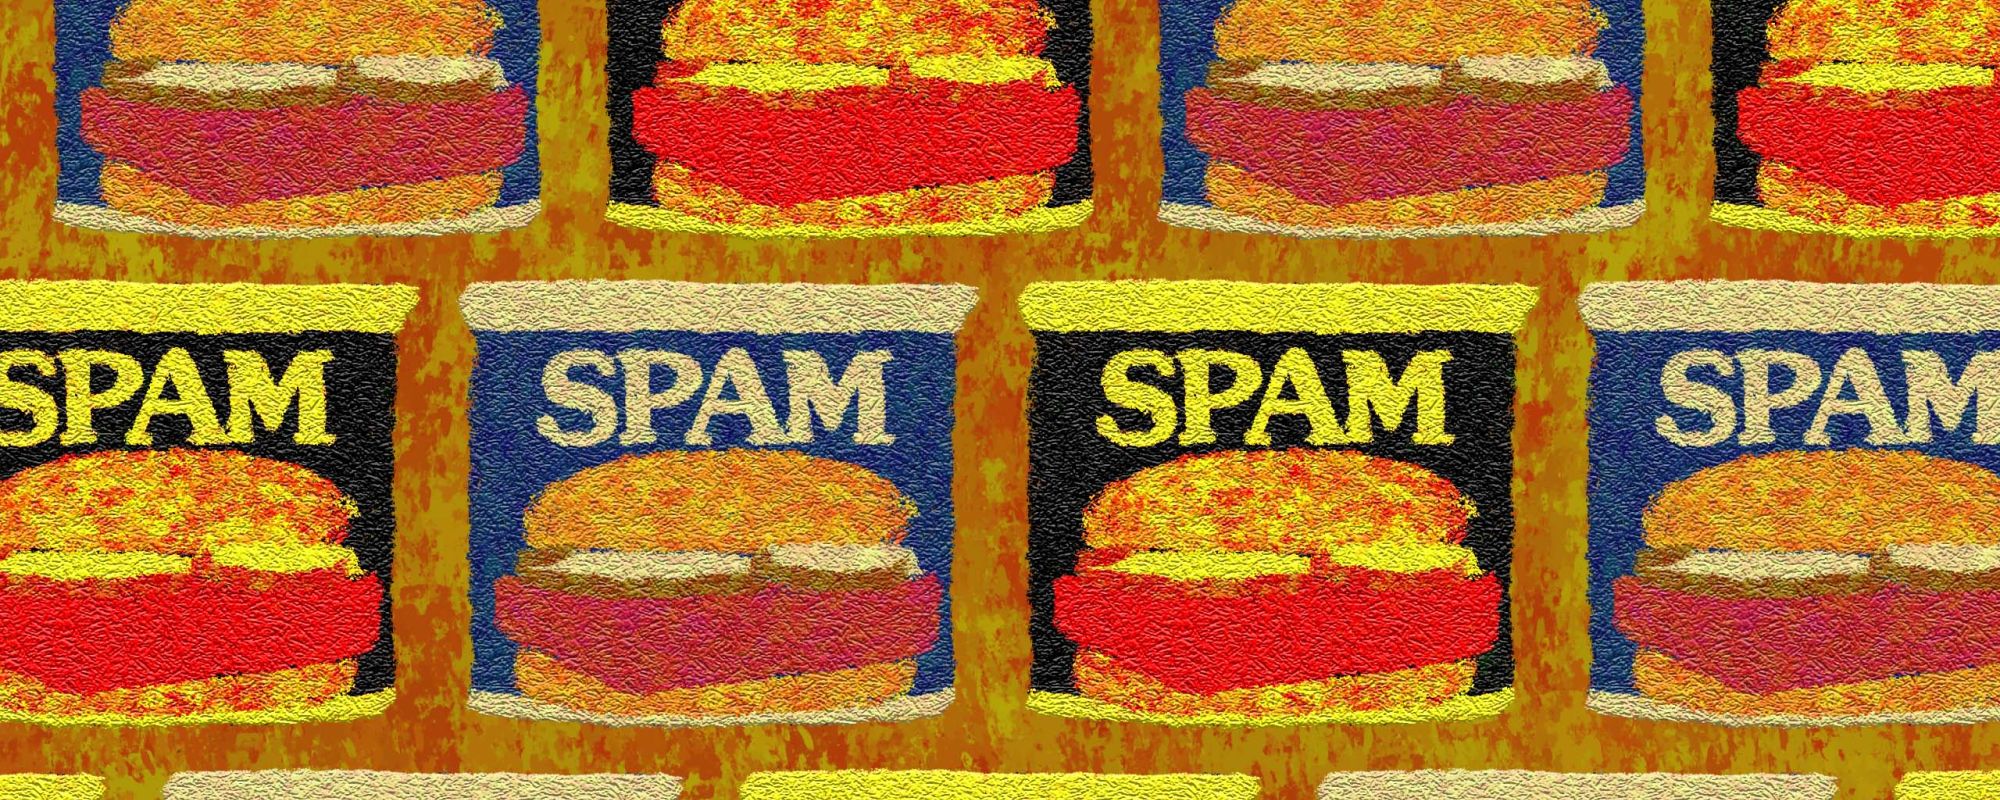 shelves of SPAM on a wall in blue cans